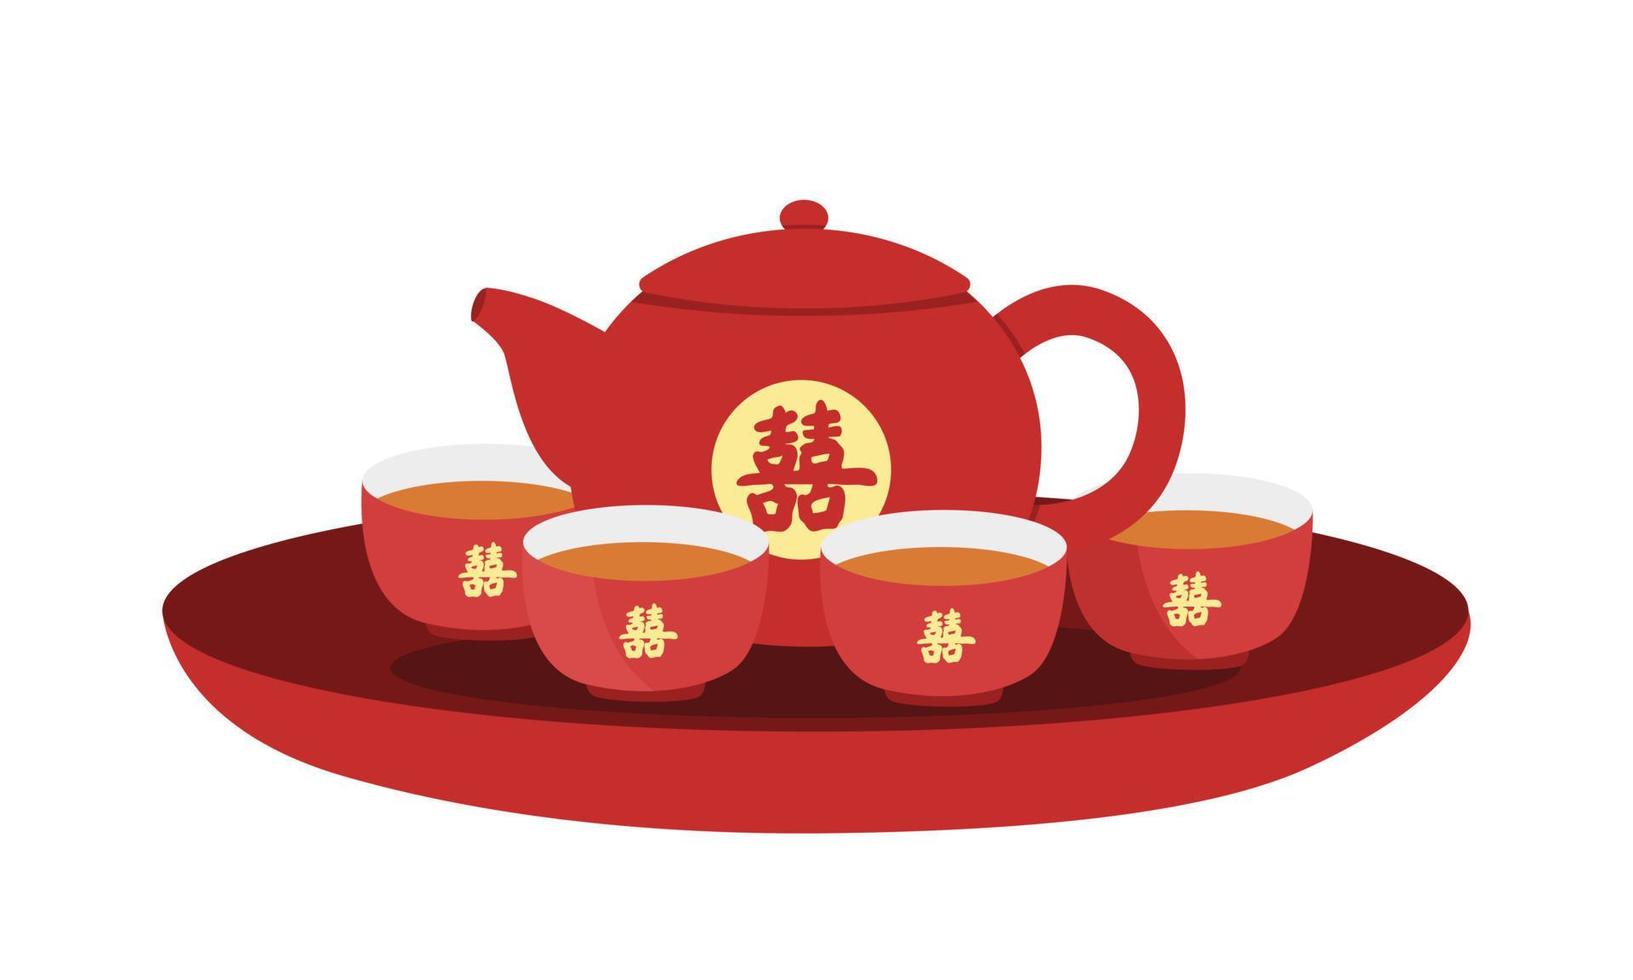 Vietnamese wedding tea set clipart. Wedding red teapot and cups flat vector illustration isolated on white. Vietnamese traditional wedding ceremony concept. Chinese text label means Double Happiness